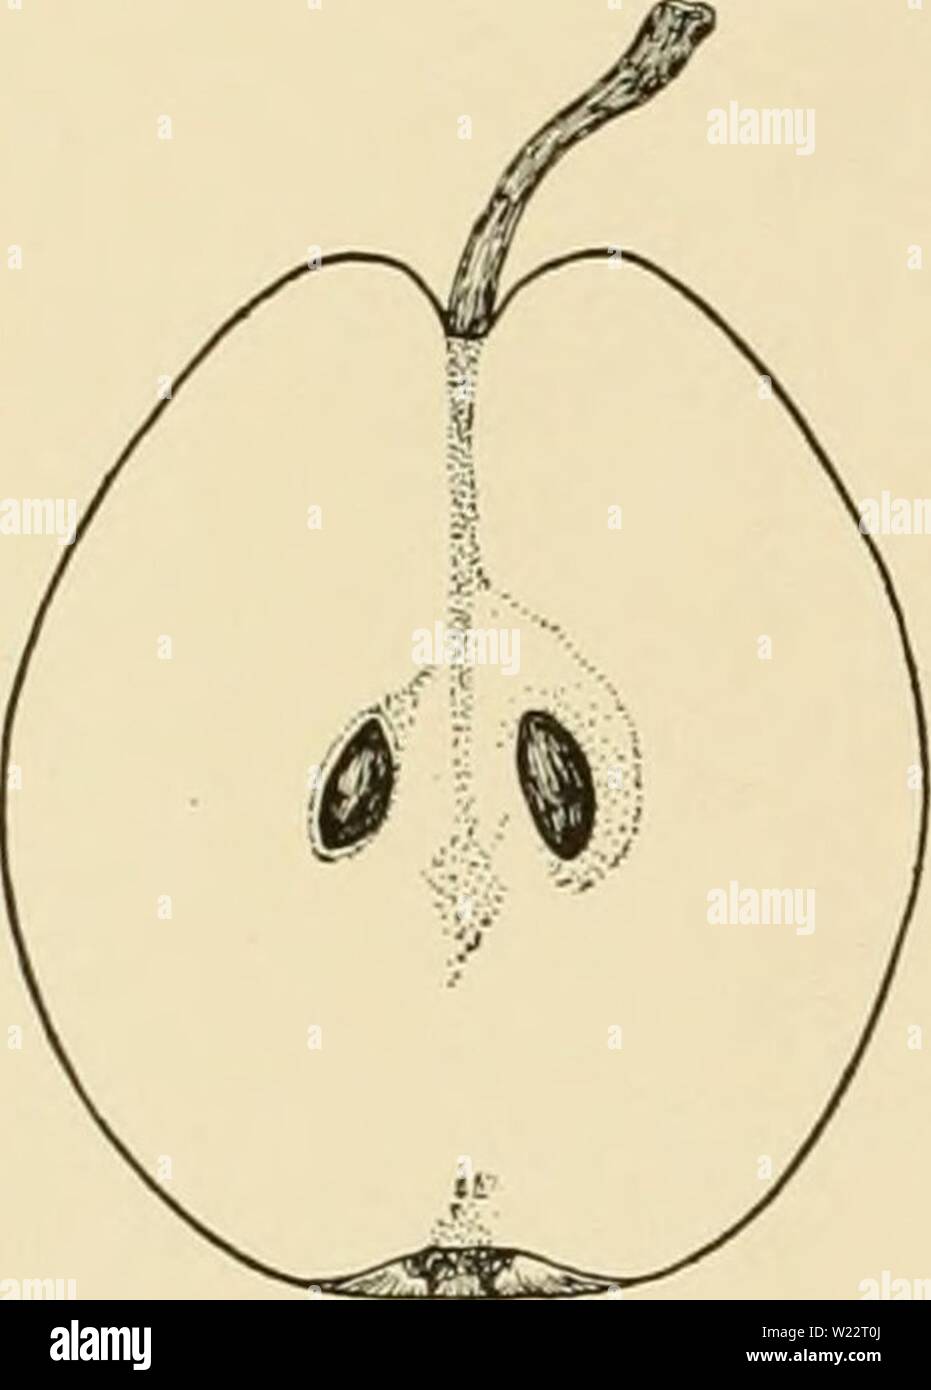 Archive image from page 109 of Cyclopedia of hardy fruits (1922). Cyclopedia of hardy fruits  cyclopediaofhard00hedr Year: 1922  FLEMISH BEAUTY FOX FLEMISH BEAUTY. Fig. 83. At one time Flemish Beauty was a leading commercial variety in the pear regions of eastern America, but it has been supplanted by other varieties because the toll of blighted trees is too great, and the fruits are too often disfigured by the scab- fungus. Perhaps the latter is the greater fault, as in some seasons no applications of spray    83. Flemish Beauty. (XVa) give the pears a clean cheek, and they are blackened, sca Stock Photo